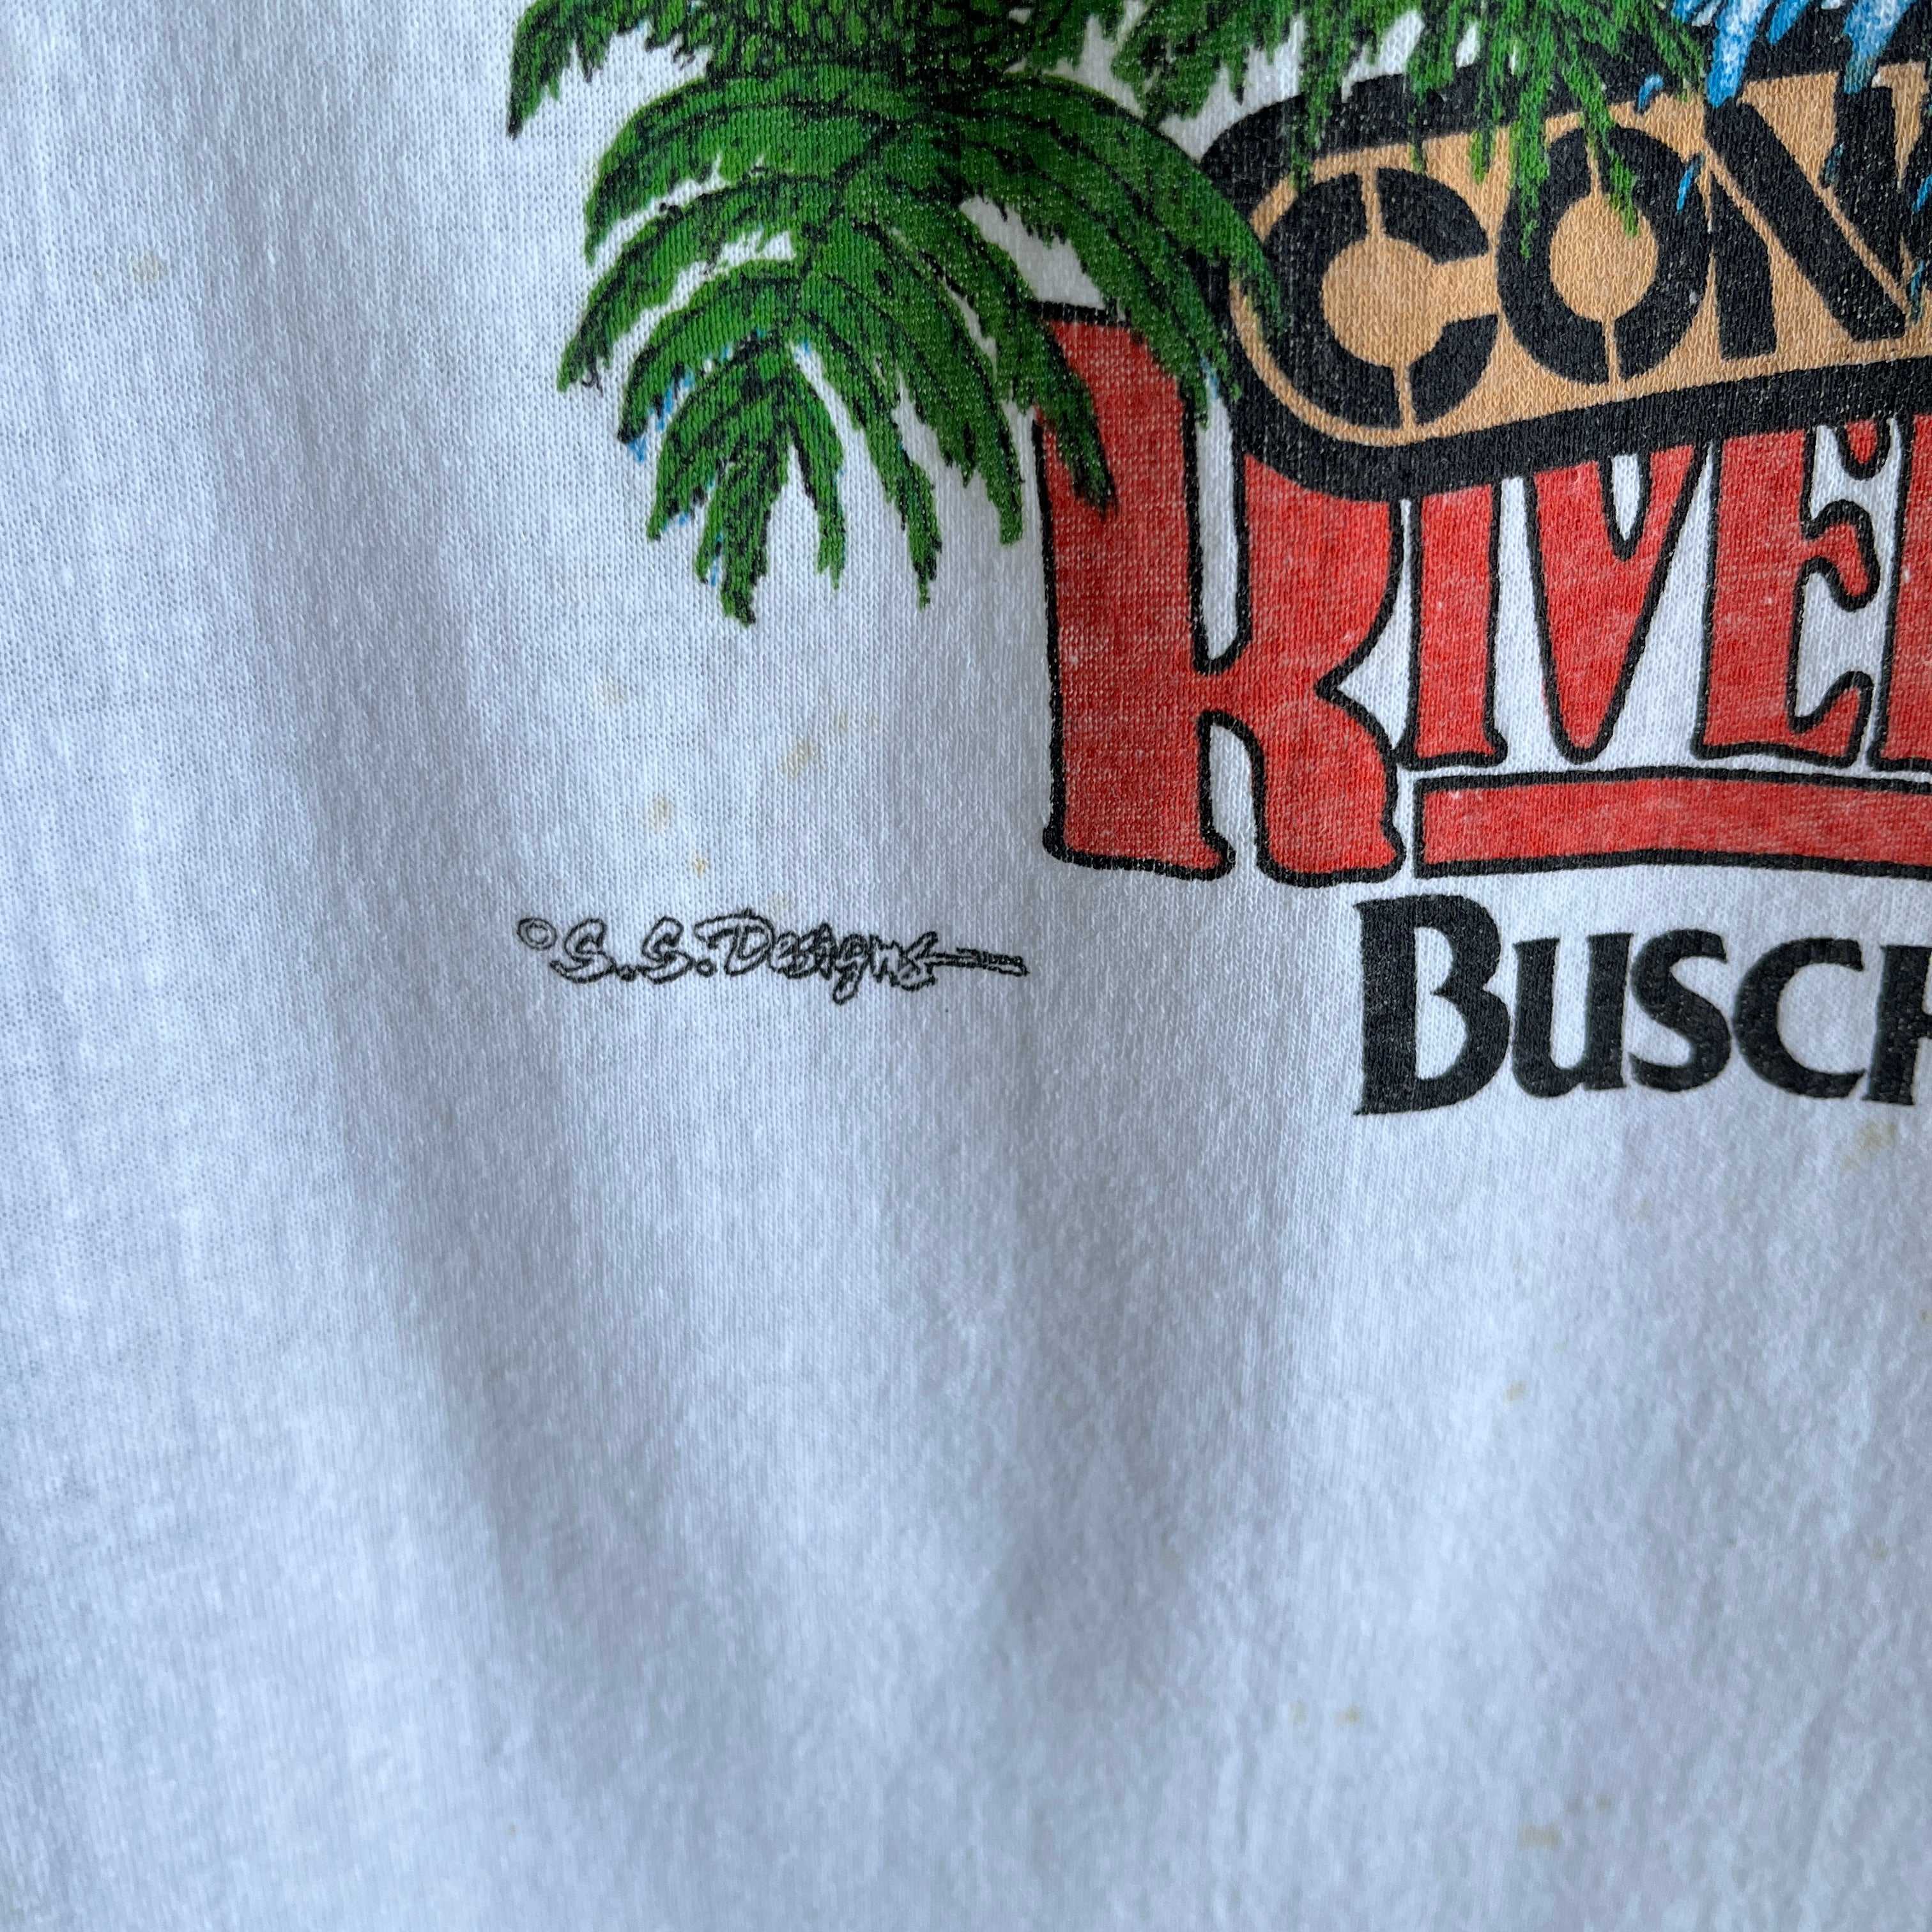 1980s I Survived Busch Gardens Congo Rover Rapids Muscle Tank